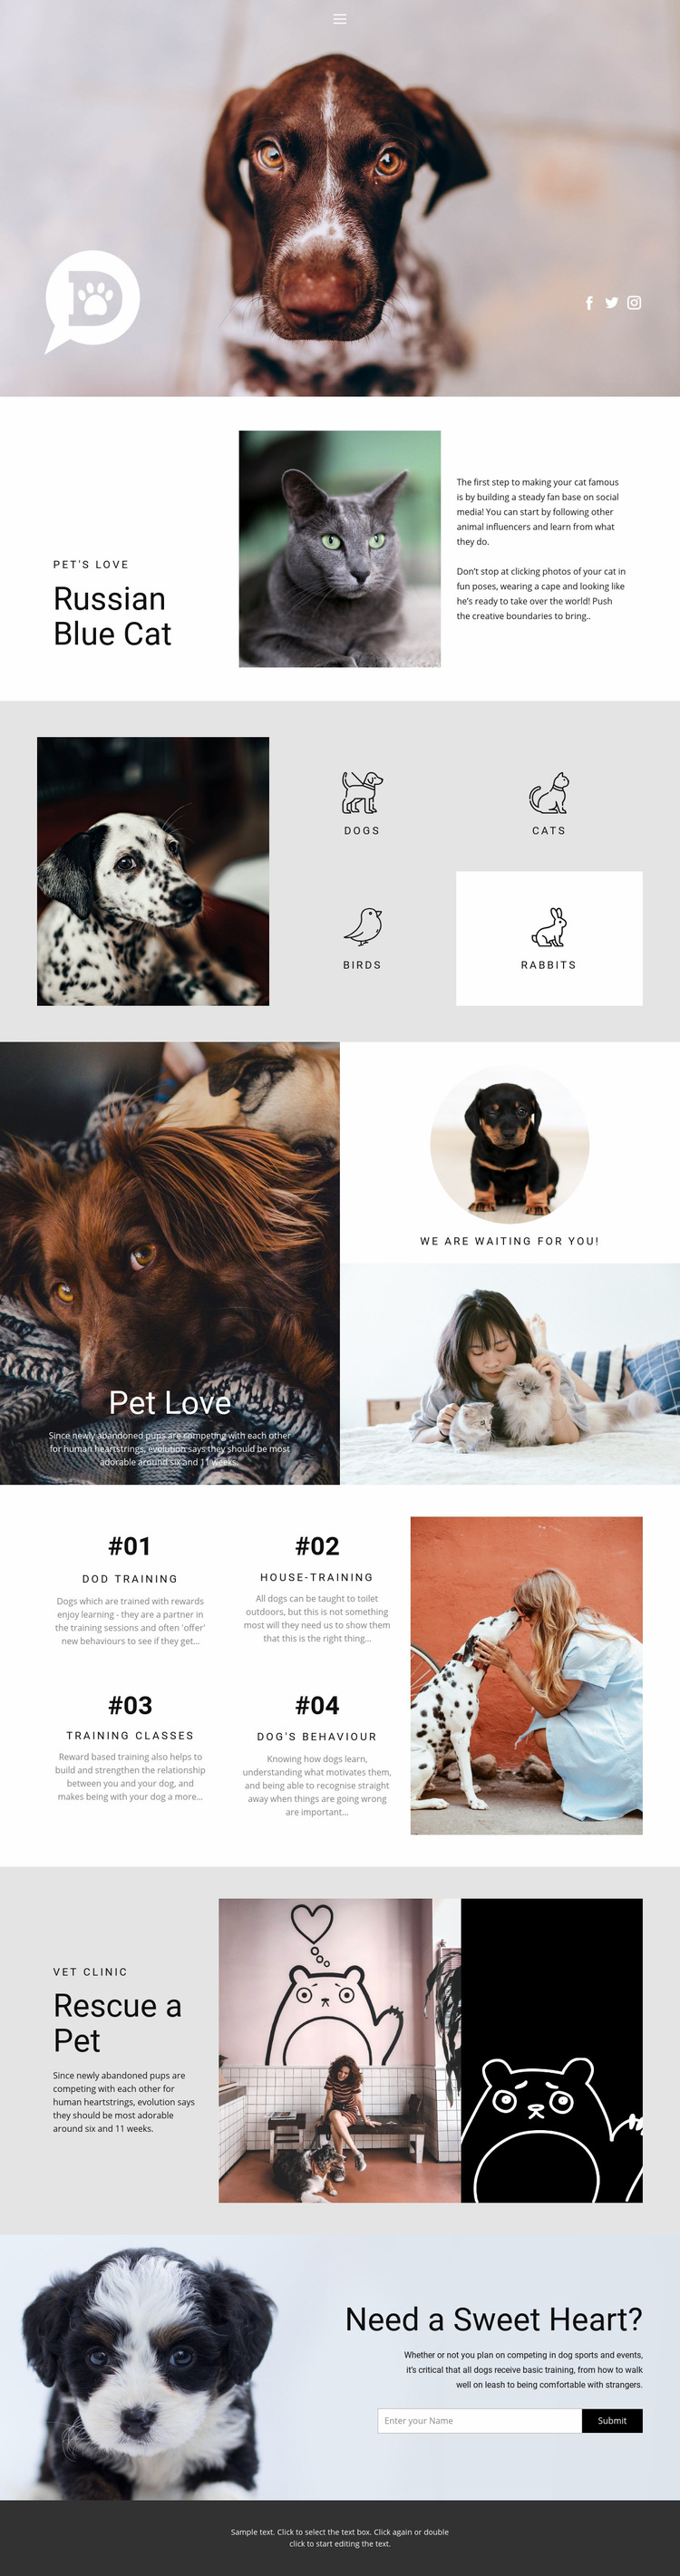 Care for pets and animals Web Page Design